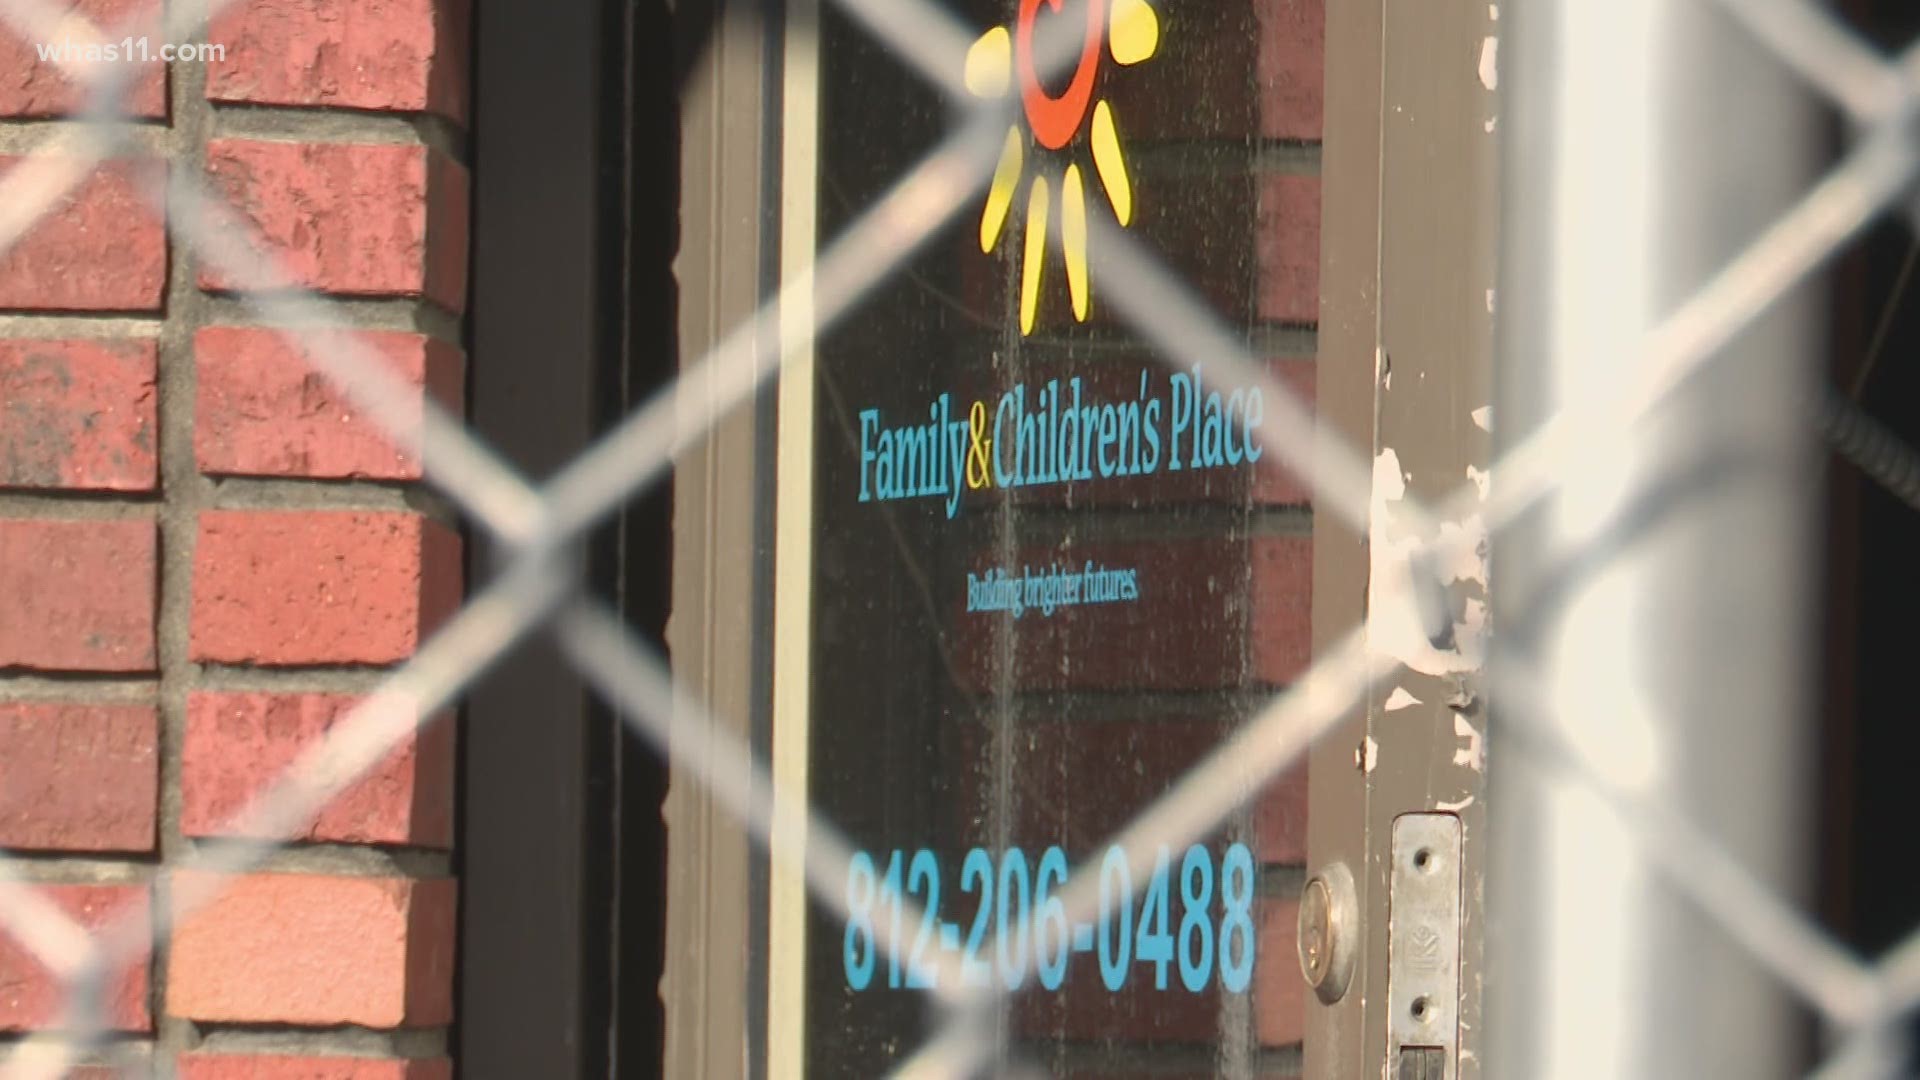 A spokesperson for the Family & Children's Place said the office was used to provide professional services for children and families impacted by abuse.